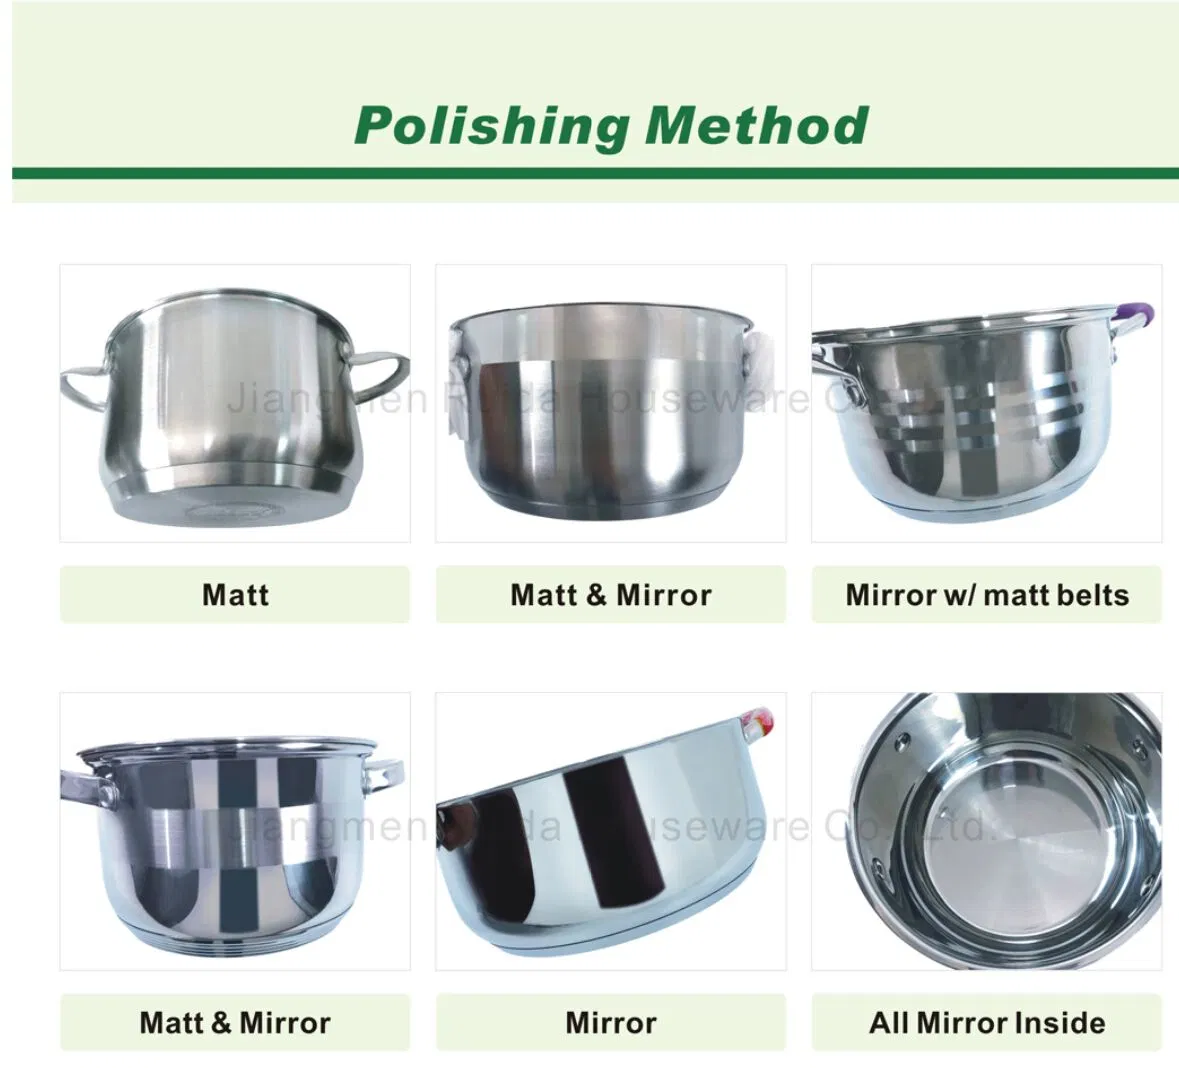 Special Stainless Steel Kitchenware in Perforation for Easy Drainage on The Lid